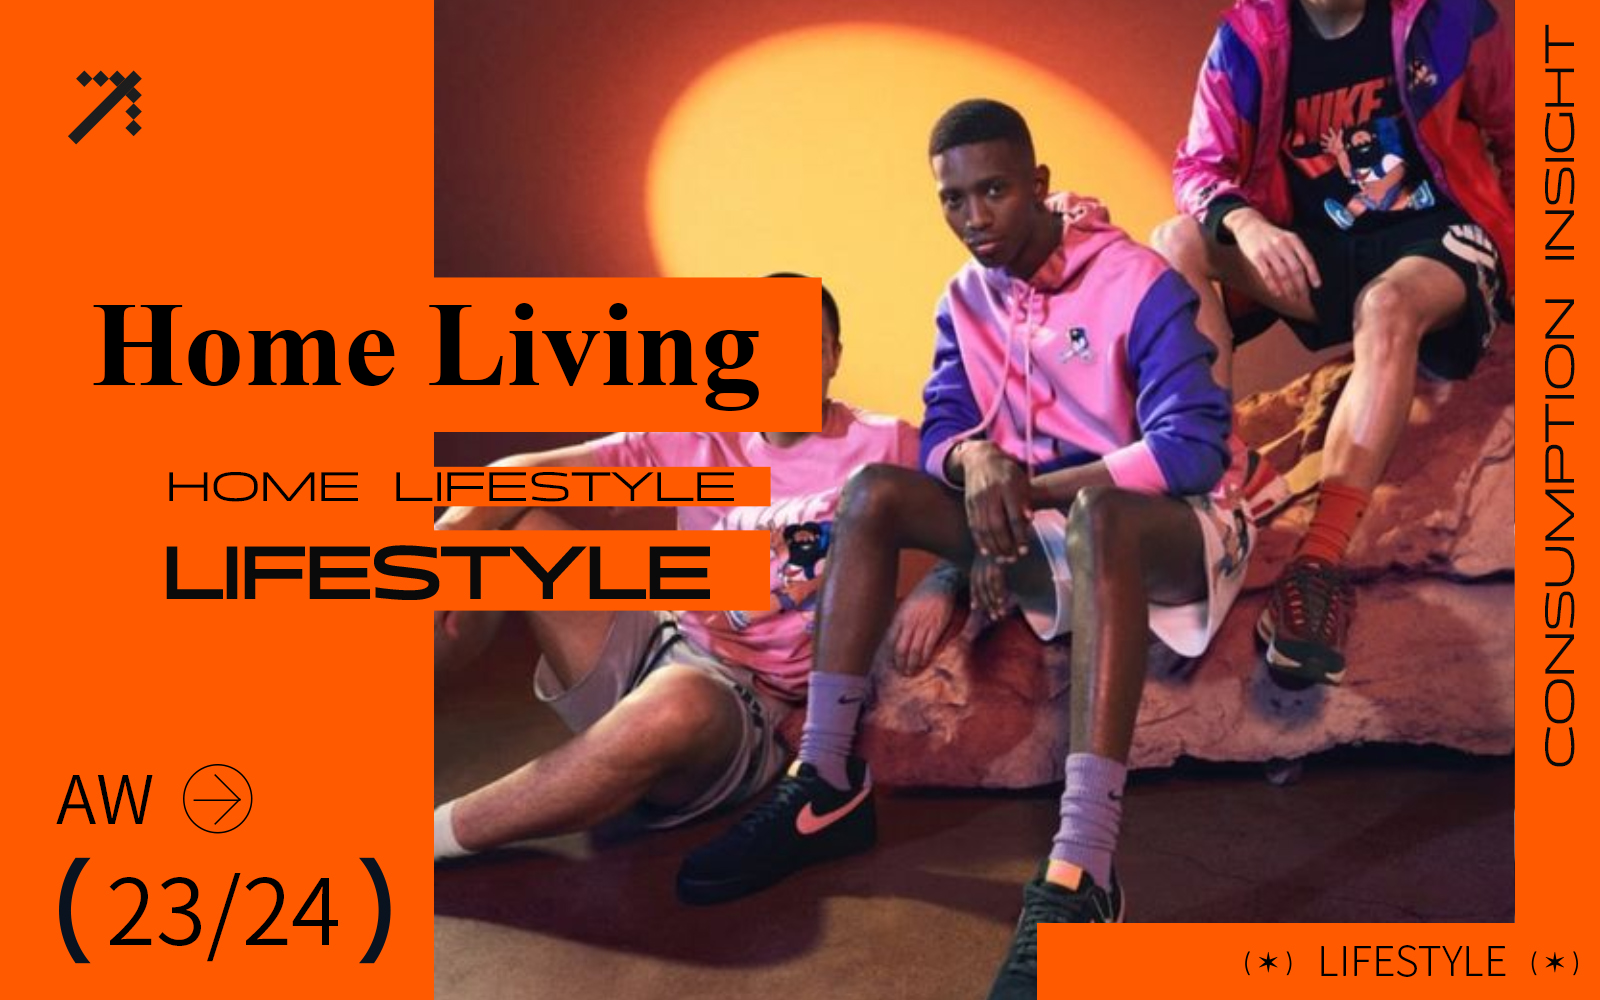 Home Life -- A/W 23/24 Lifestyle Prediction